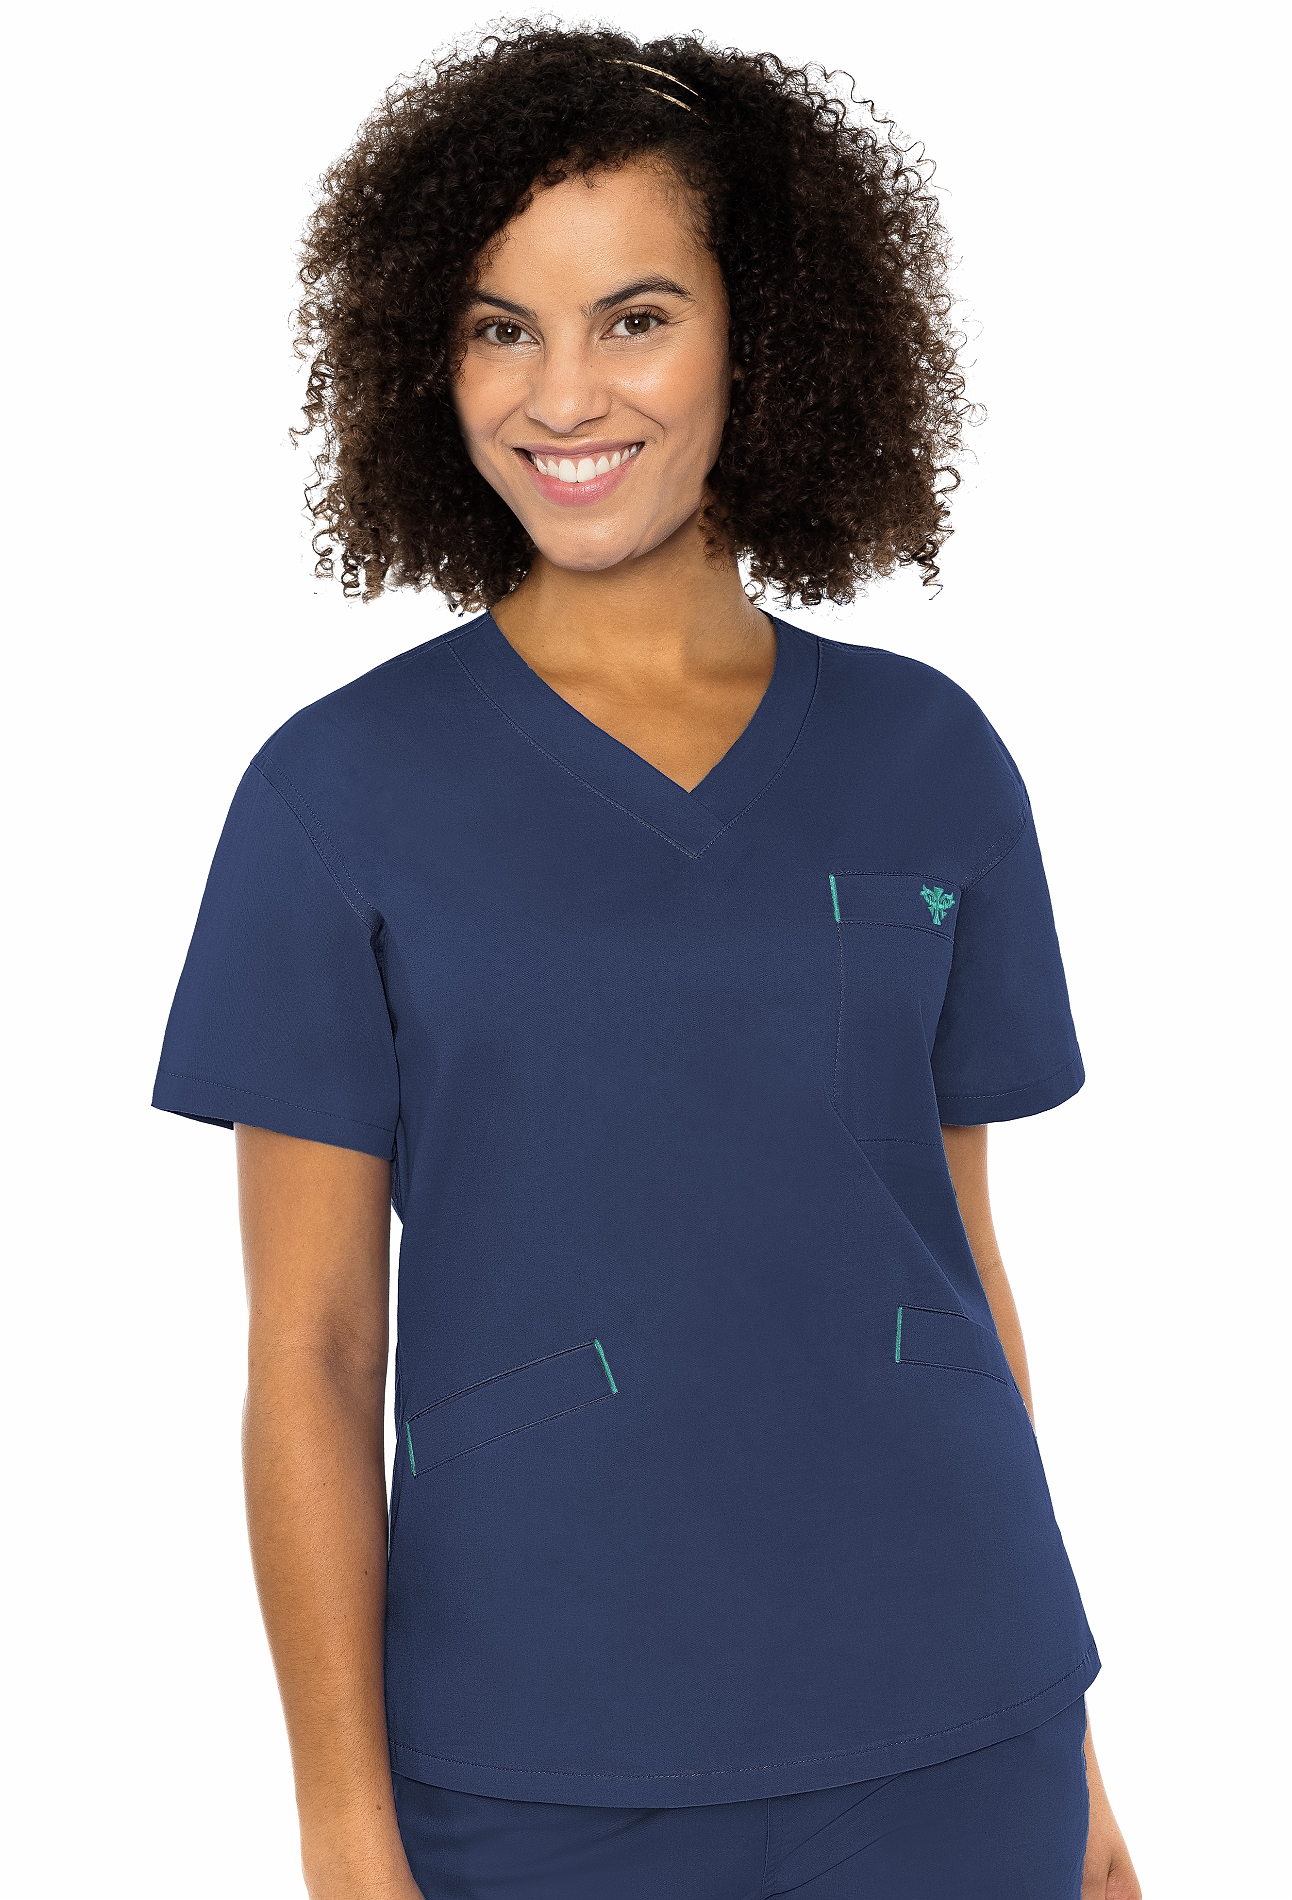 Med Couture Signature Women's 3 Pocket V-Neck Scrub Top-MC8403 (New Navy/spearmint - XX-Large)